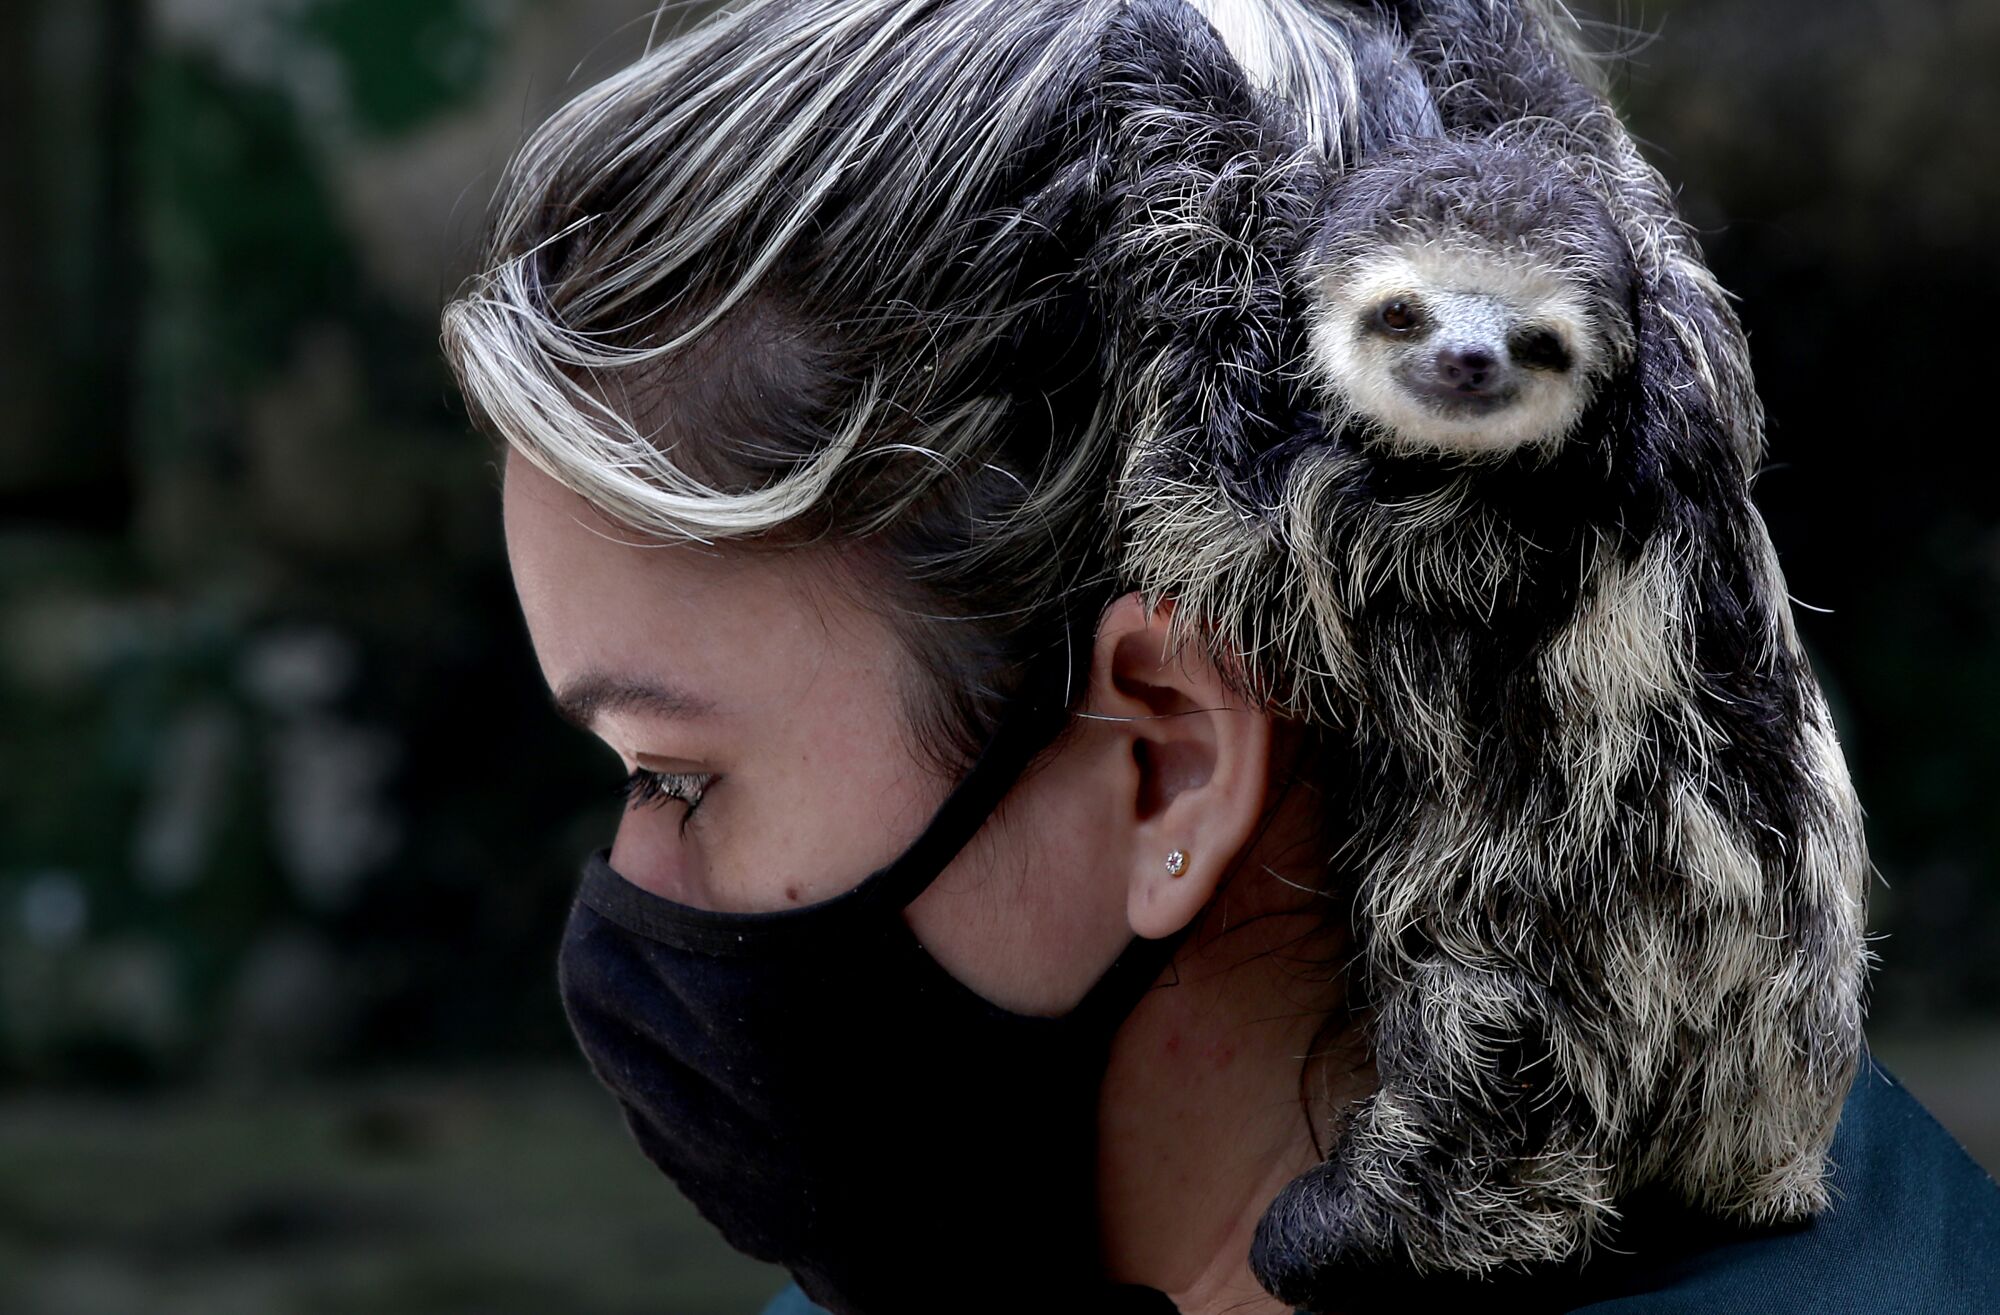 A sloth takes refuge in the hair of a woman